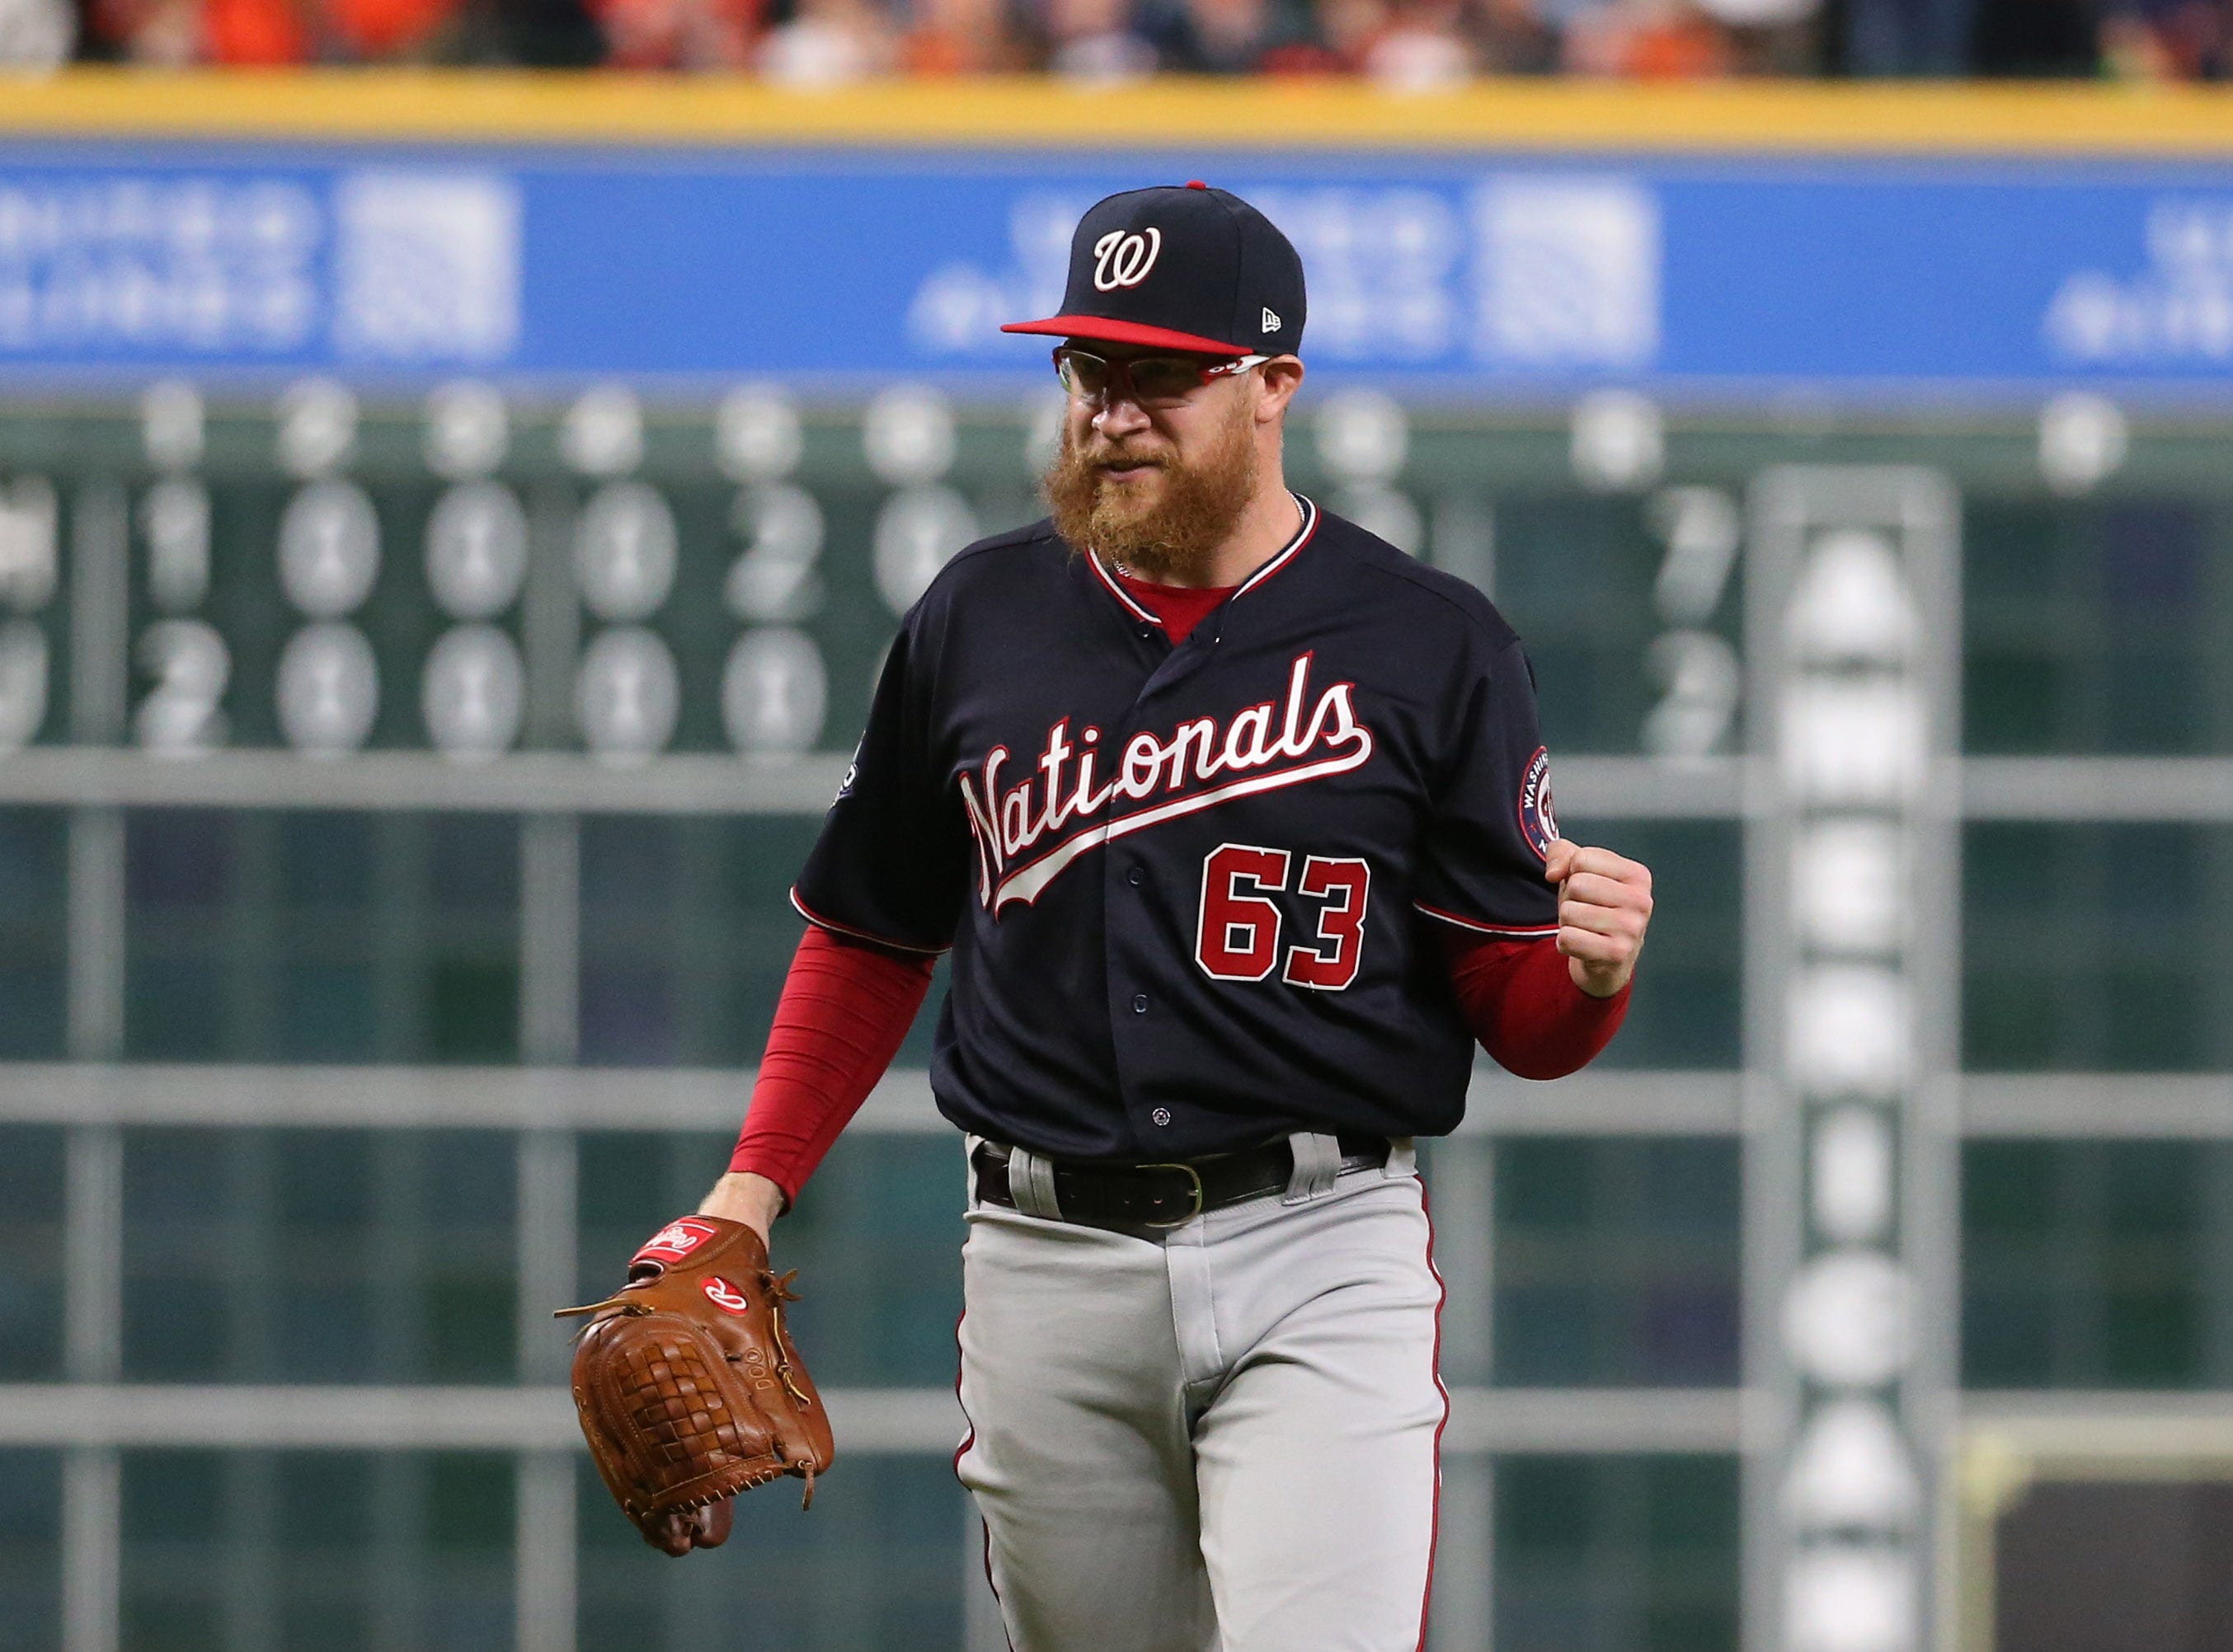 c2a1a635-21e7-4d8f-b58c-47e3d3f4bbb6-Doolittle_WH_No_ Washington Nationals closer Sean Doolittle declines White House invite: 'I just can't go'